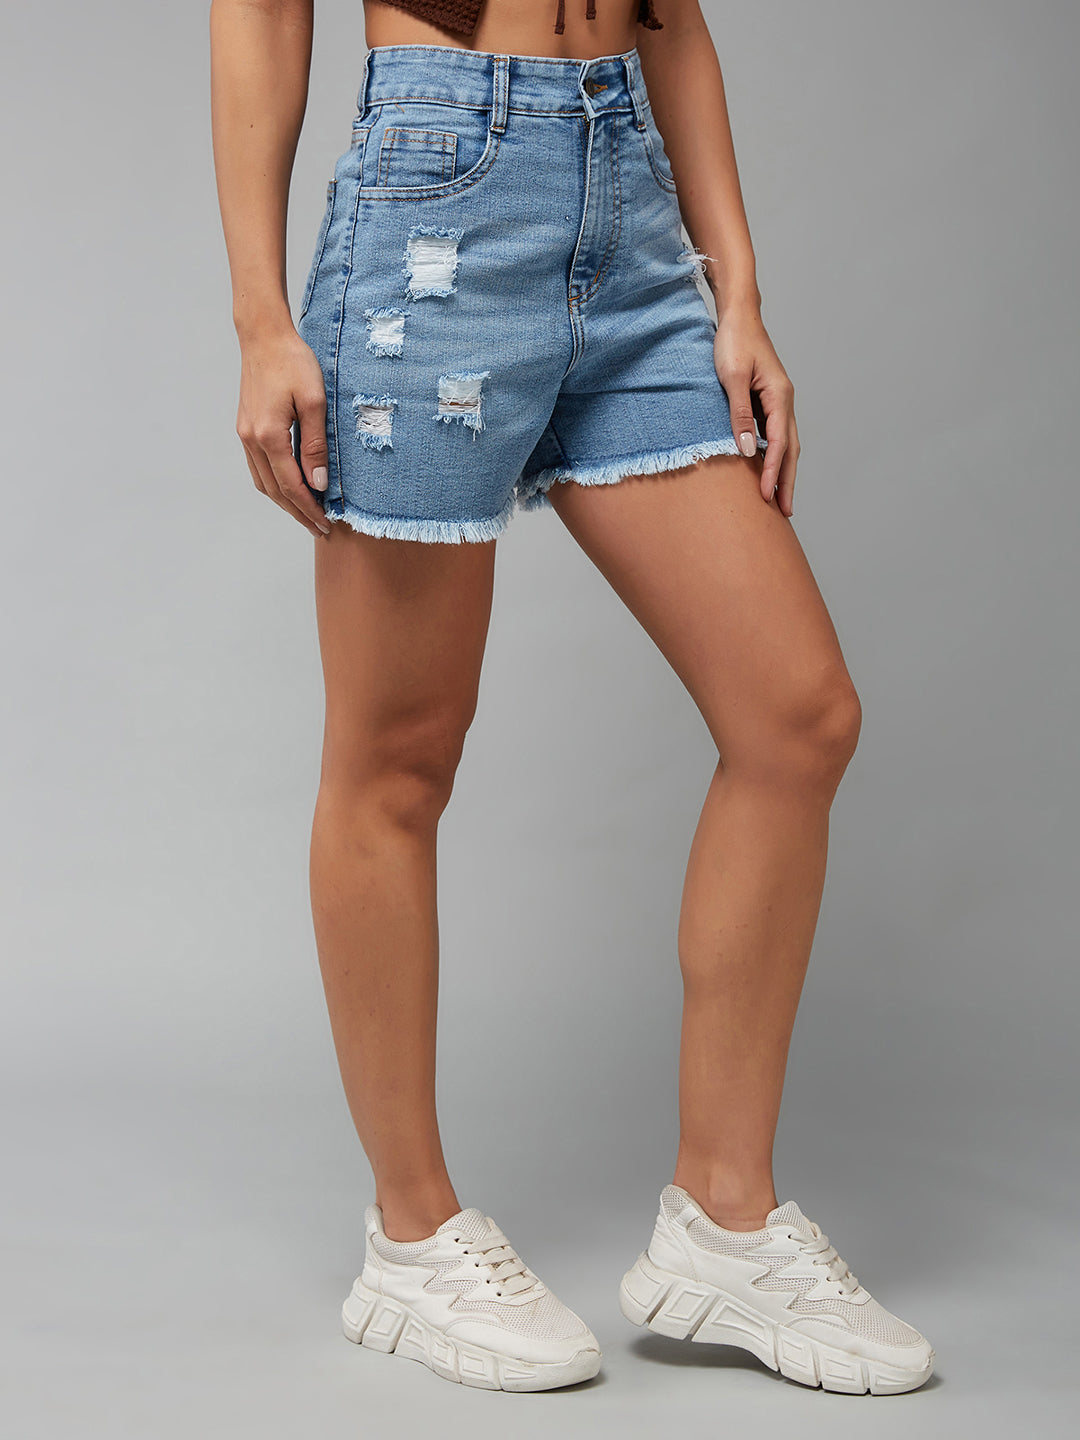 Women's Light Blue Relaxed Fit Mid Rise Highly Distressed Regular Denim Shorts